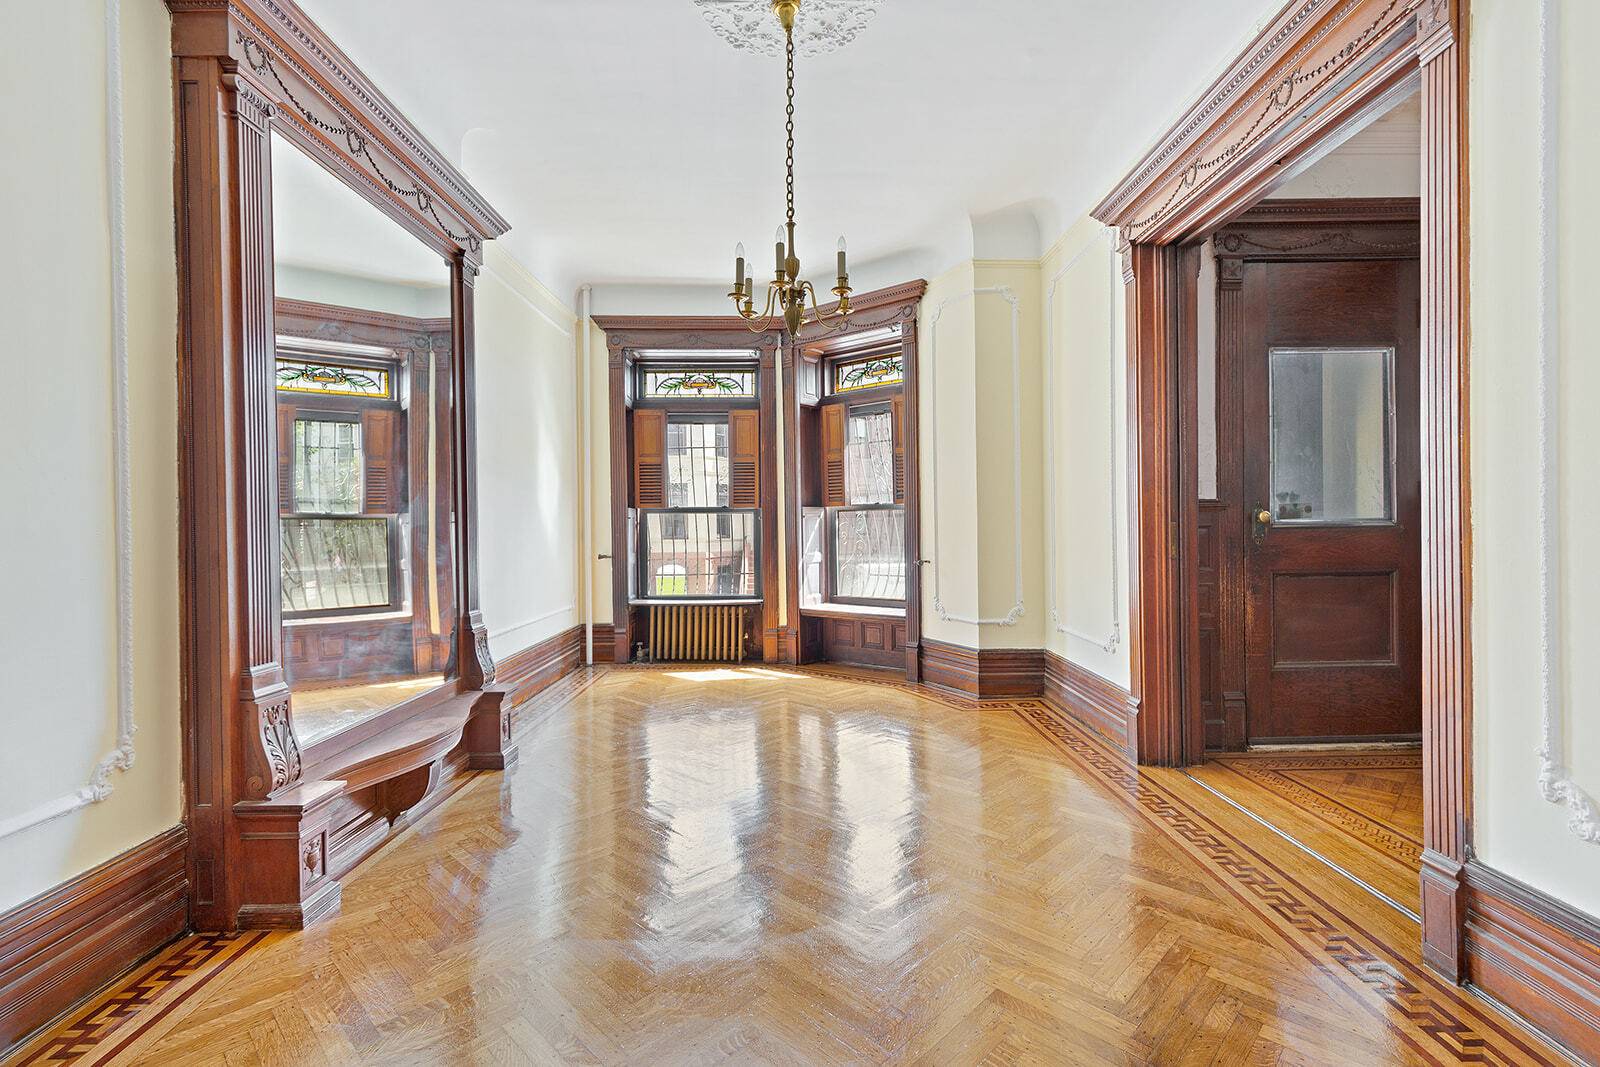 Welcome to 208 Brooklyn Ave a one of a kind majestic and grand landmarked limestone located in Crown Heights, Brooklyn.